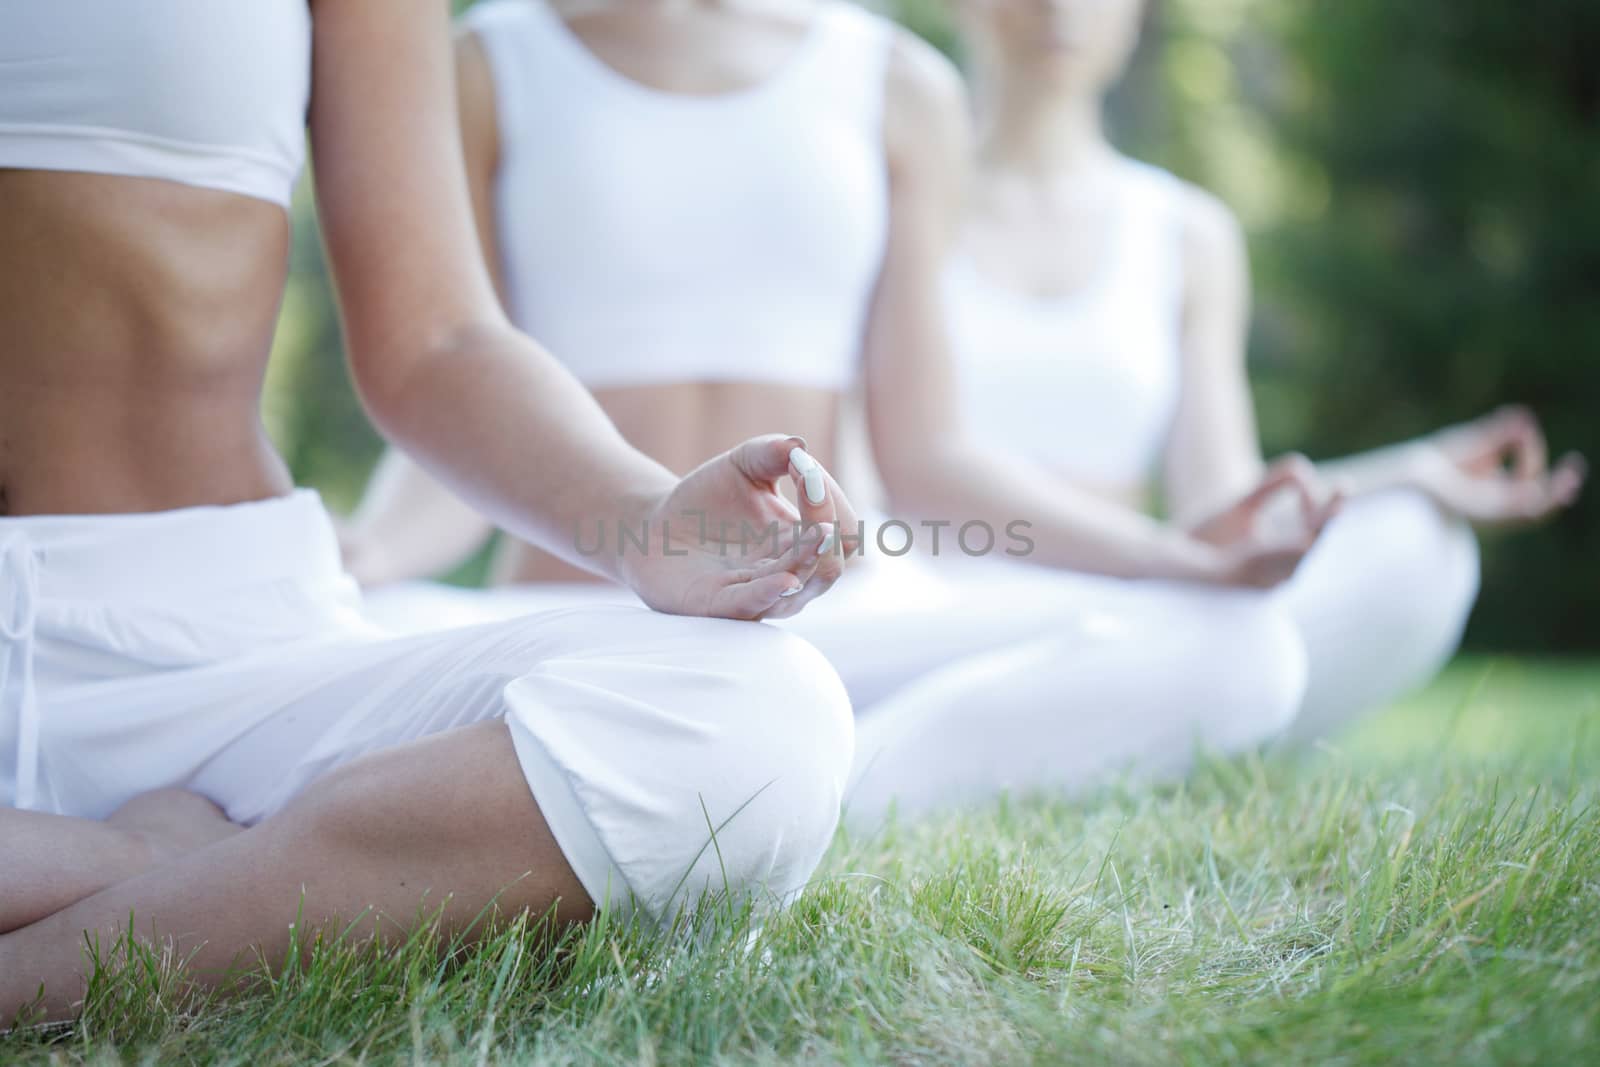 Women sitting in lotus position during yoga training at park